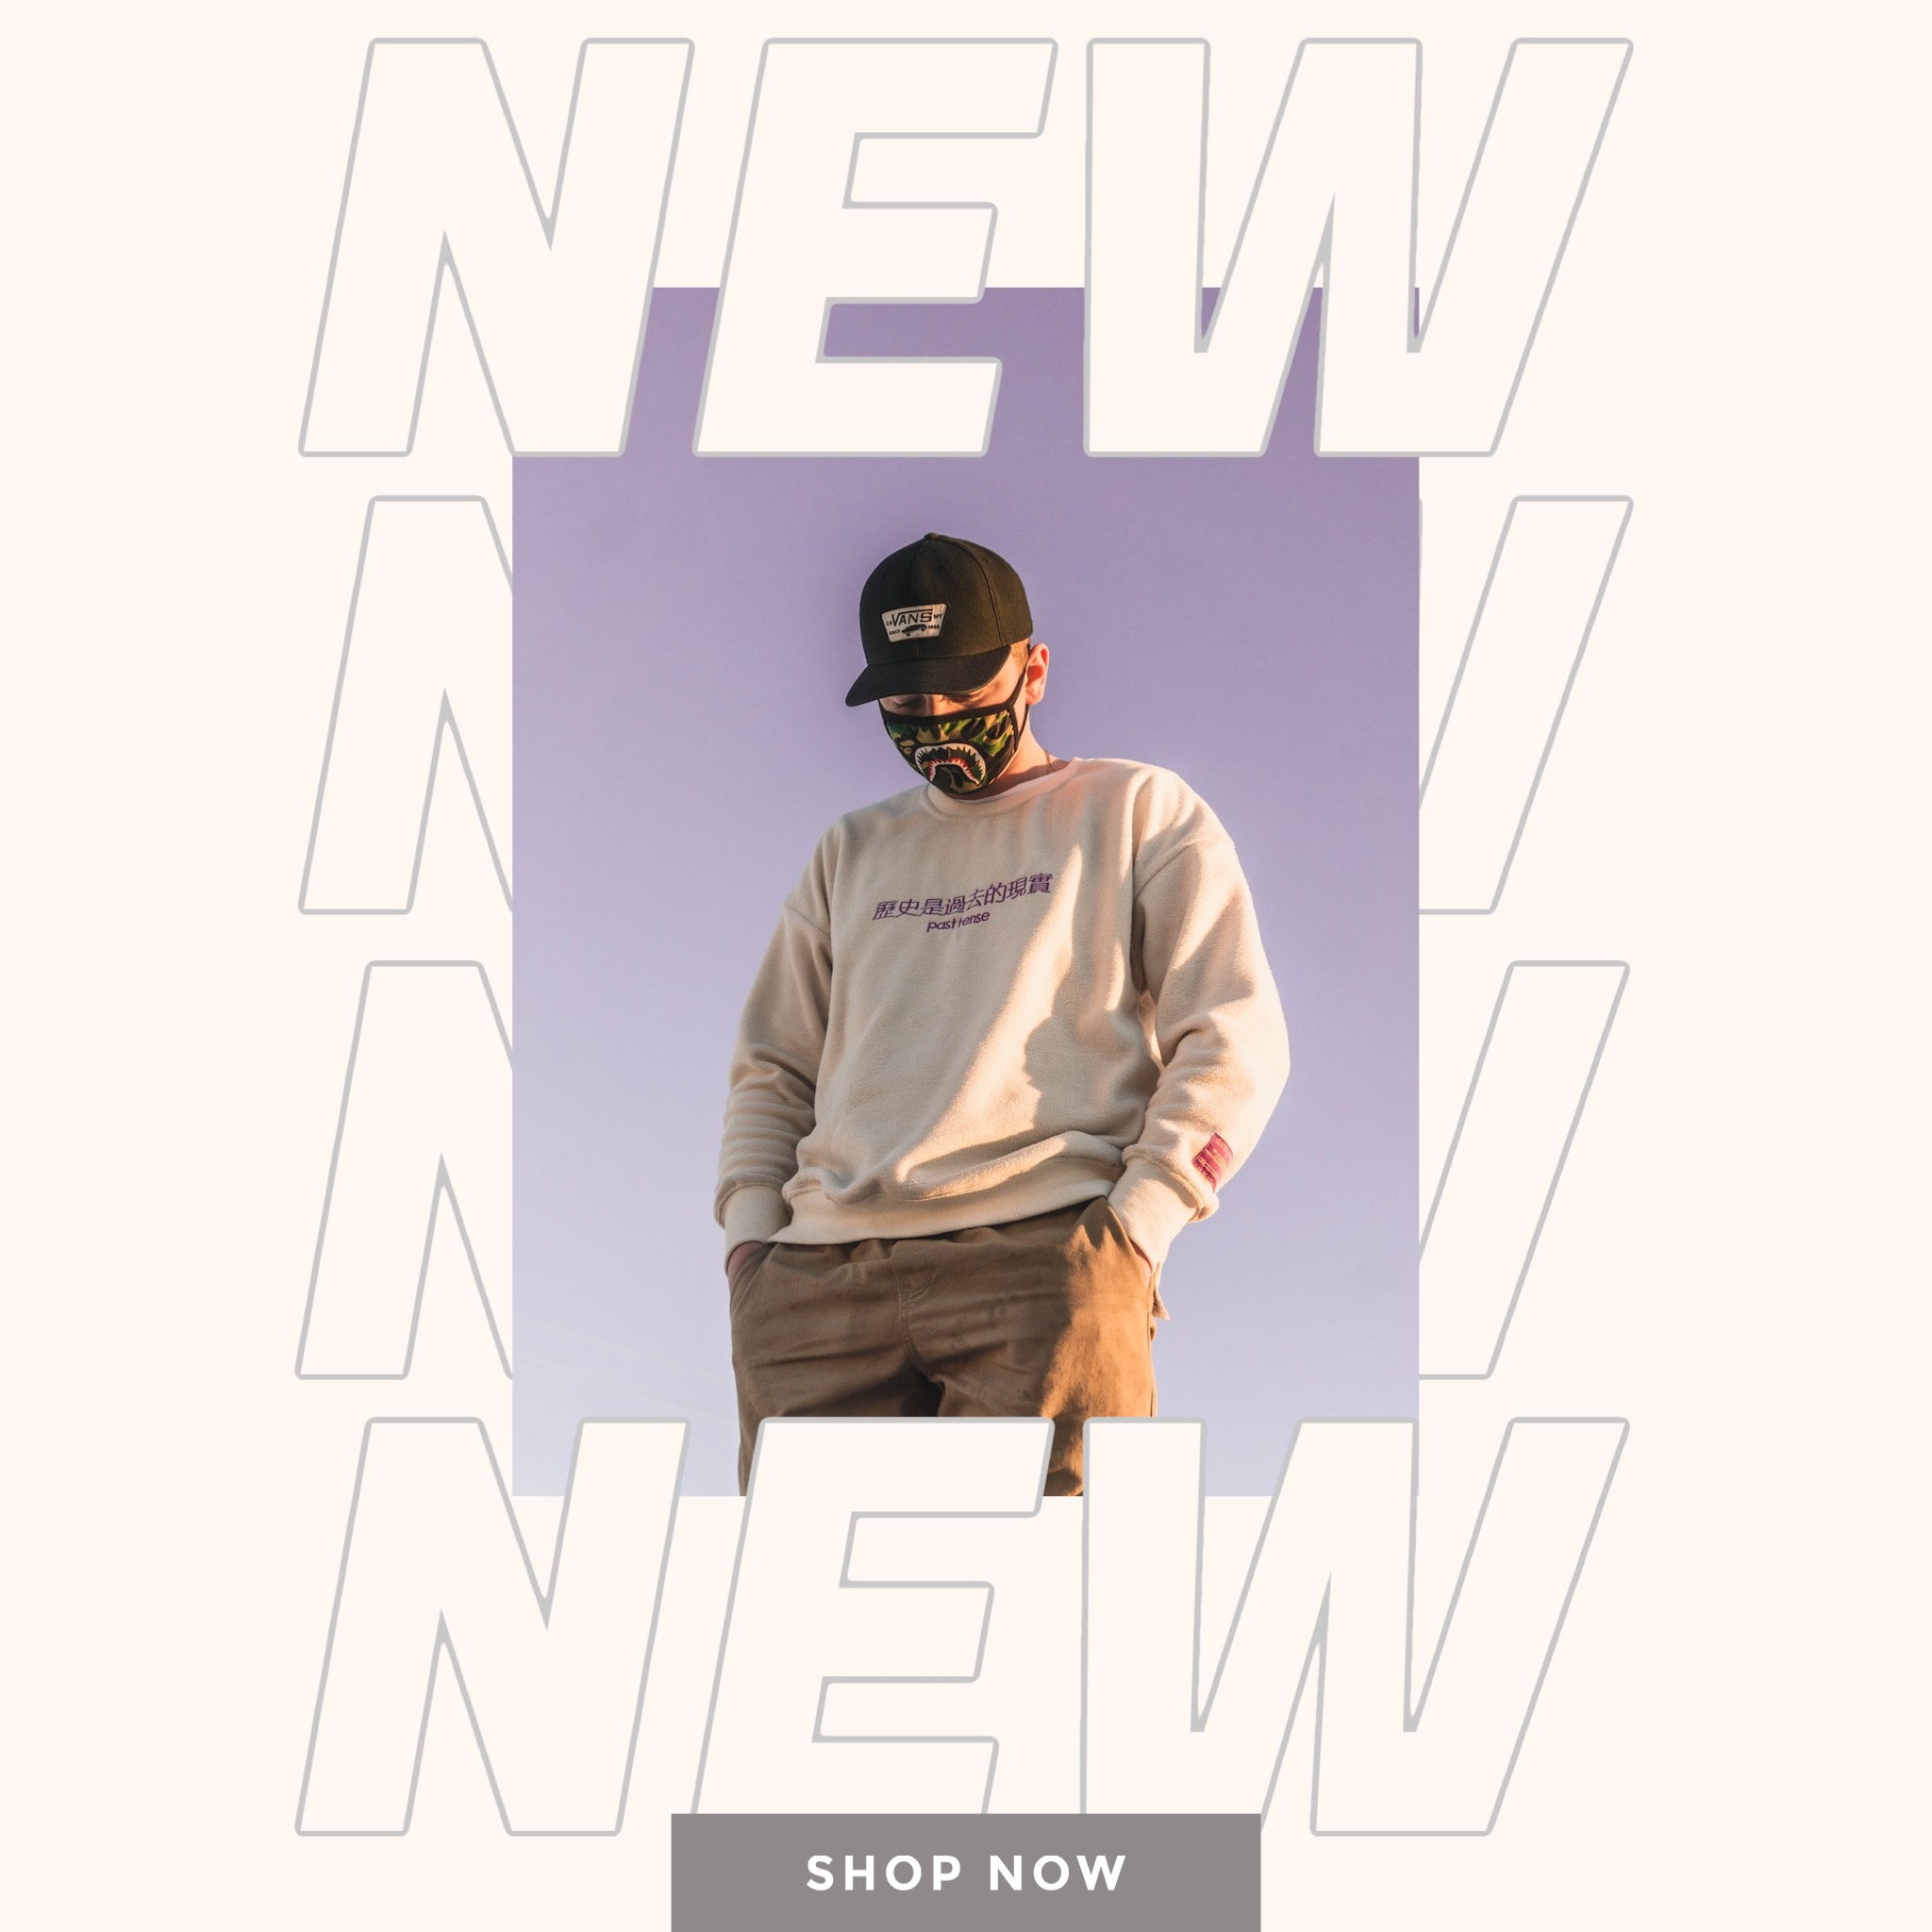 Man looking down new collection shop now Facebook Post template